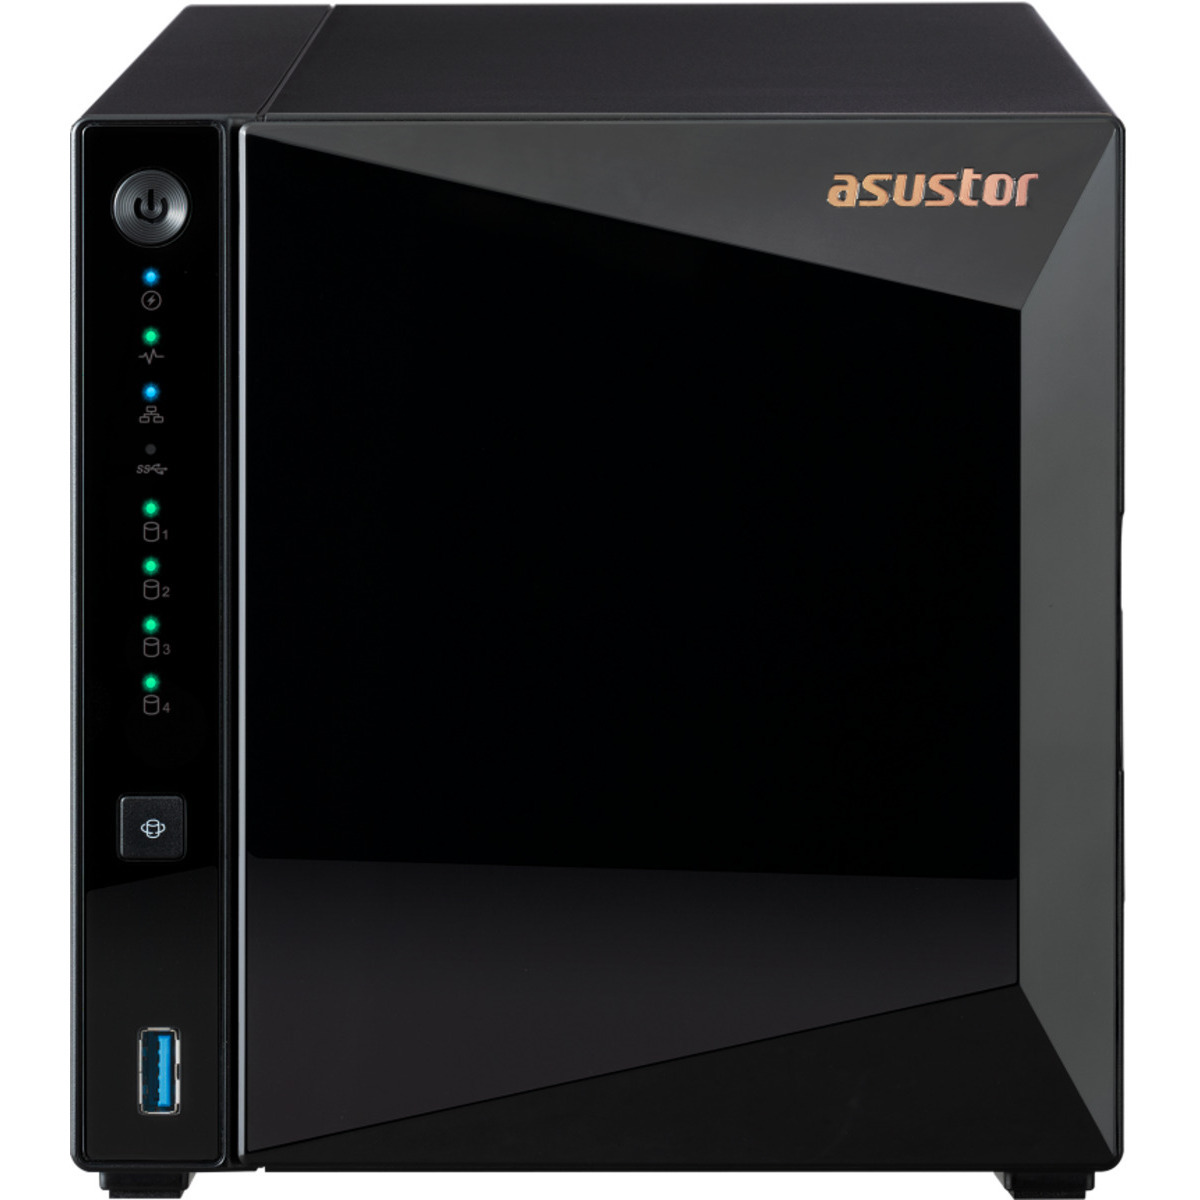 ASUSTOR DRIVESTOR 4 Pro AS3304T 24tb 4-Bay Desktop Personal / Basic Home / Small Office NAS - Network Attached Storage Device 4x6tb Western Digital Red WD60EFAX 3.5 5400rpm SATA 6Gb/s HDD NAS Class Drives Installed - Burn-In Tested DRIVESTOR 4 Pro AS3304T